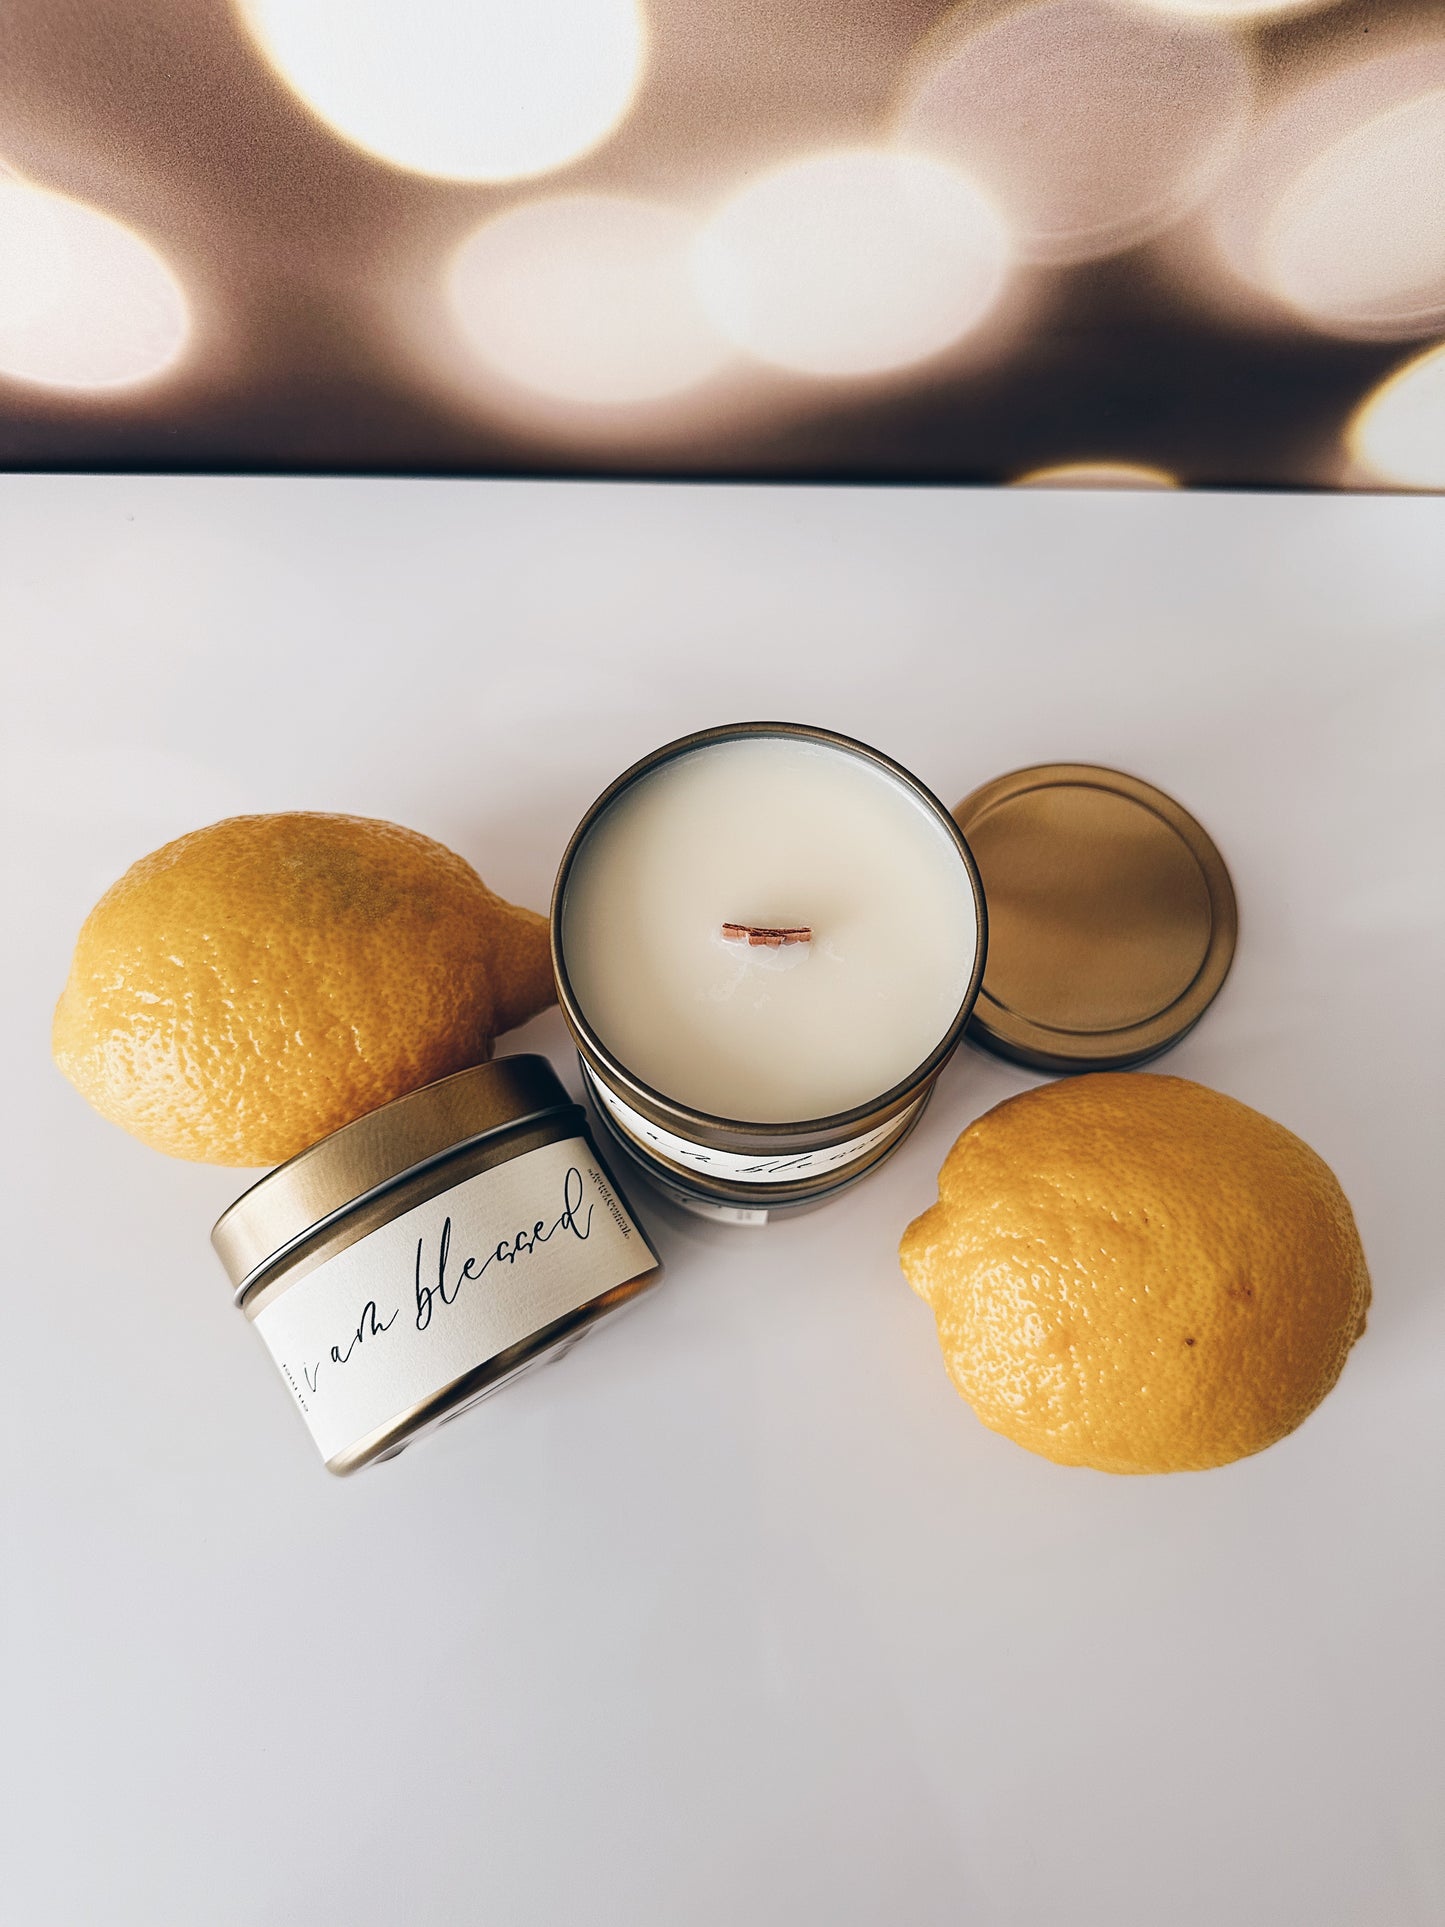 en mer | i am blessed | soy wax candle